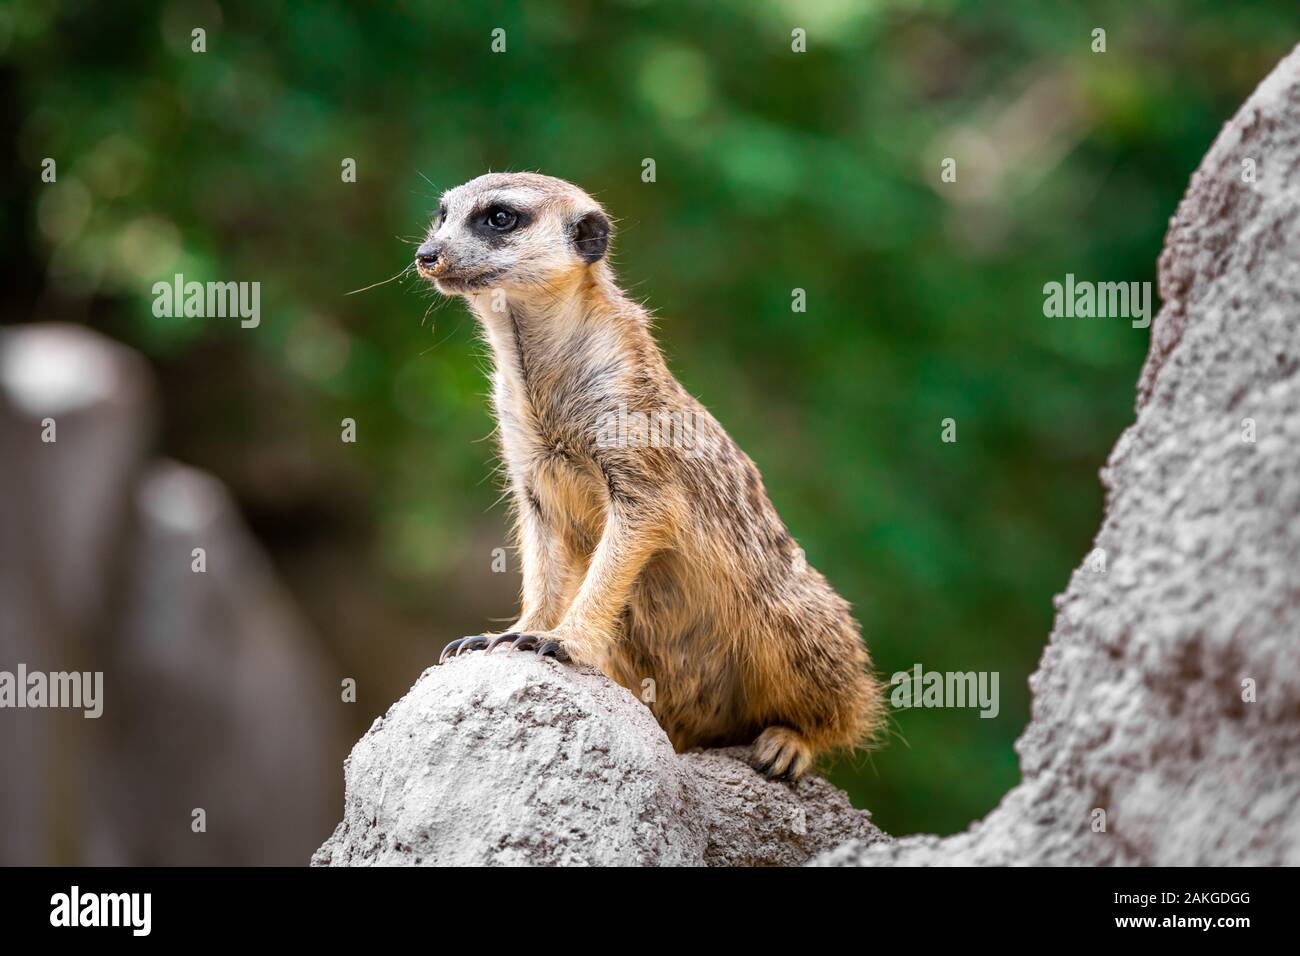 Close up of a meerkat standing on a stone ledge and surveilling the surroundings, against a bokeh background Stock Photo